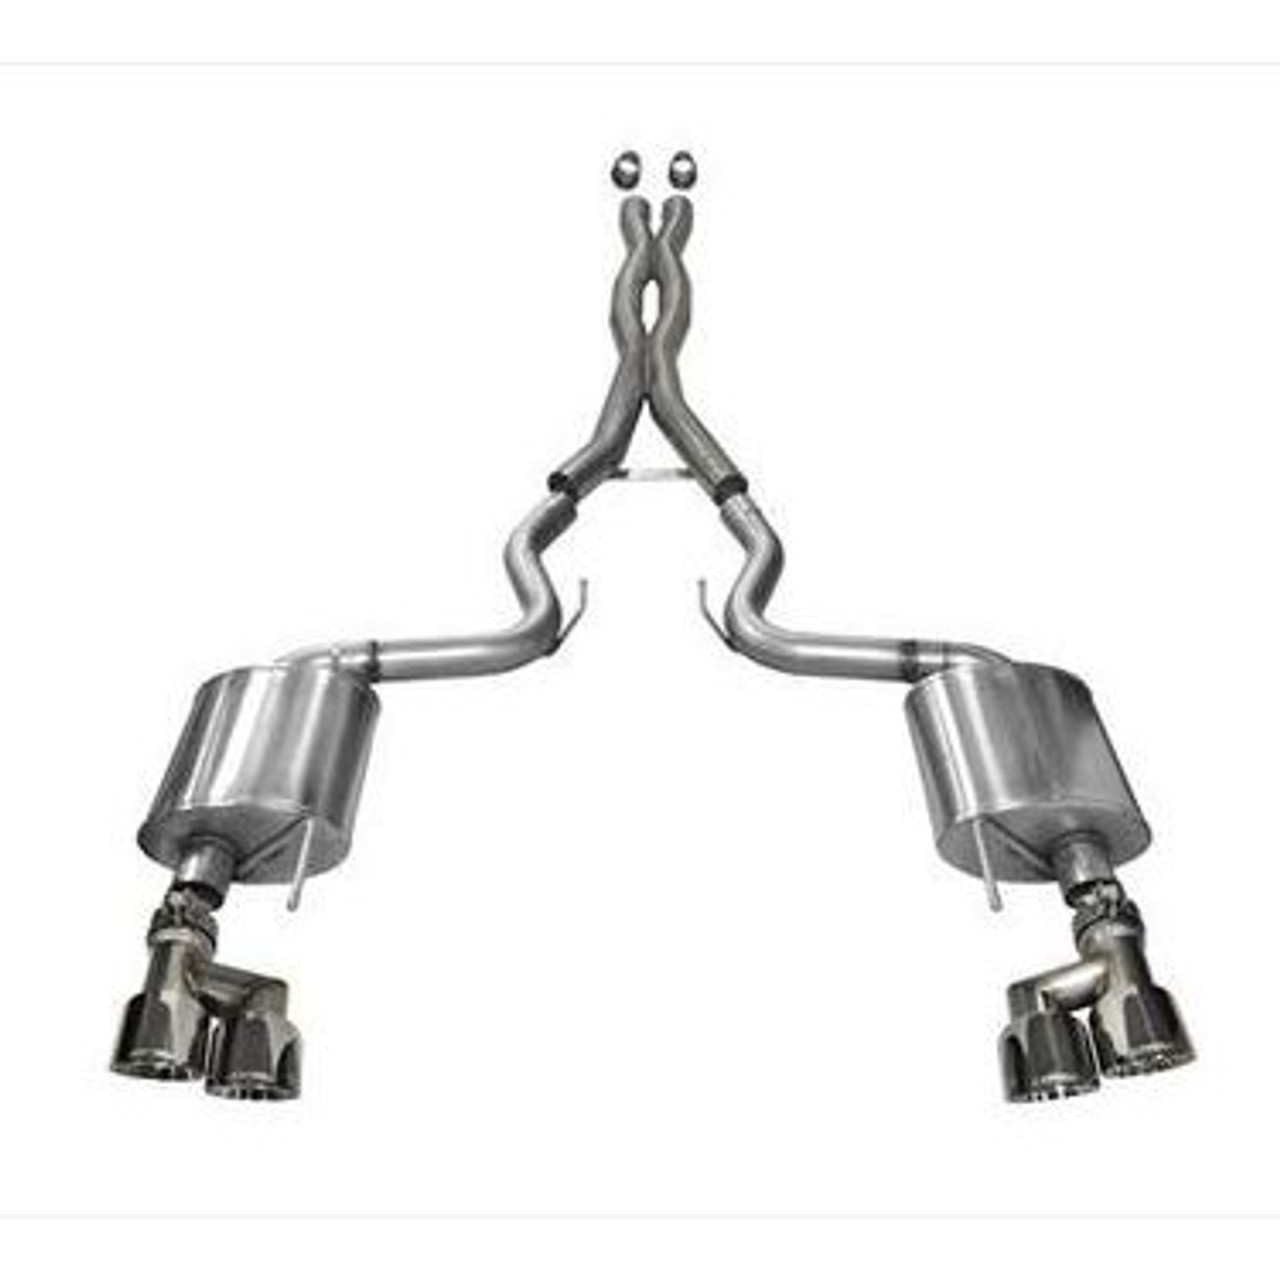 Corsa 15-17 Ford Mustang GT 5.0 3in Cat Back Exhaust Polish Quad Tips (Sport)